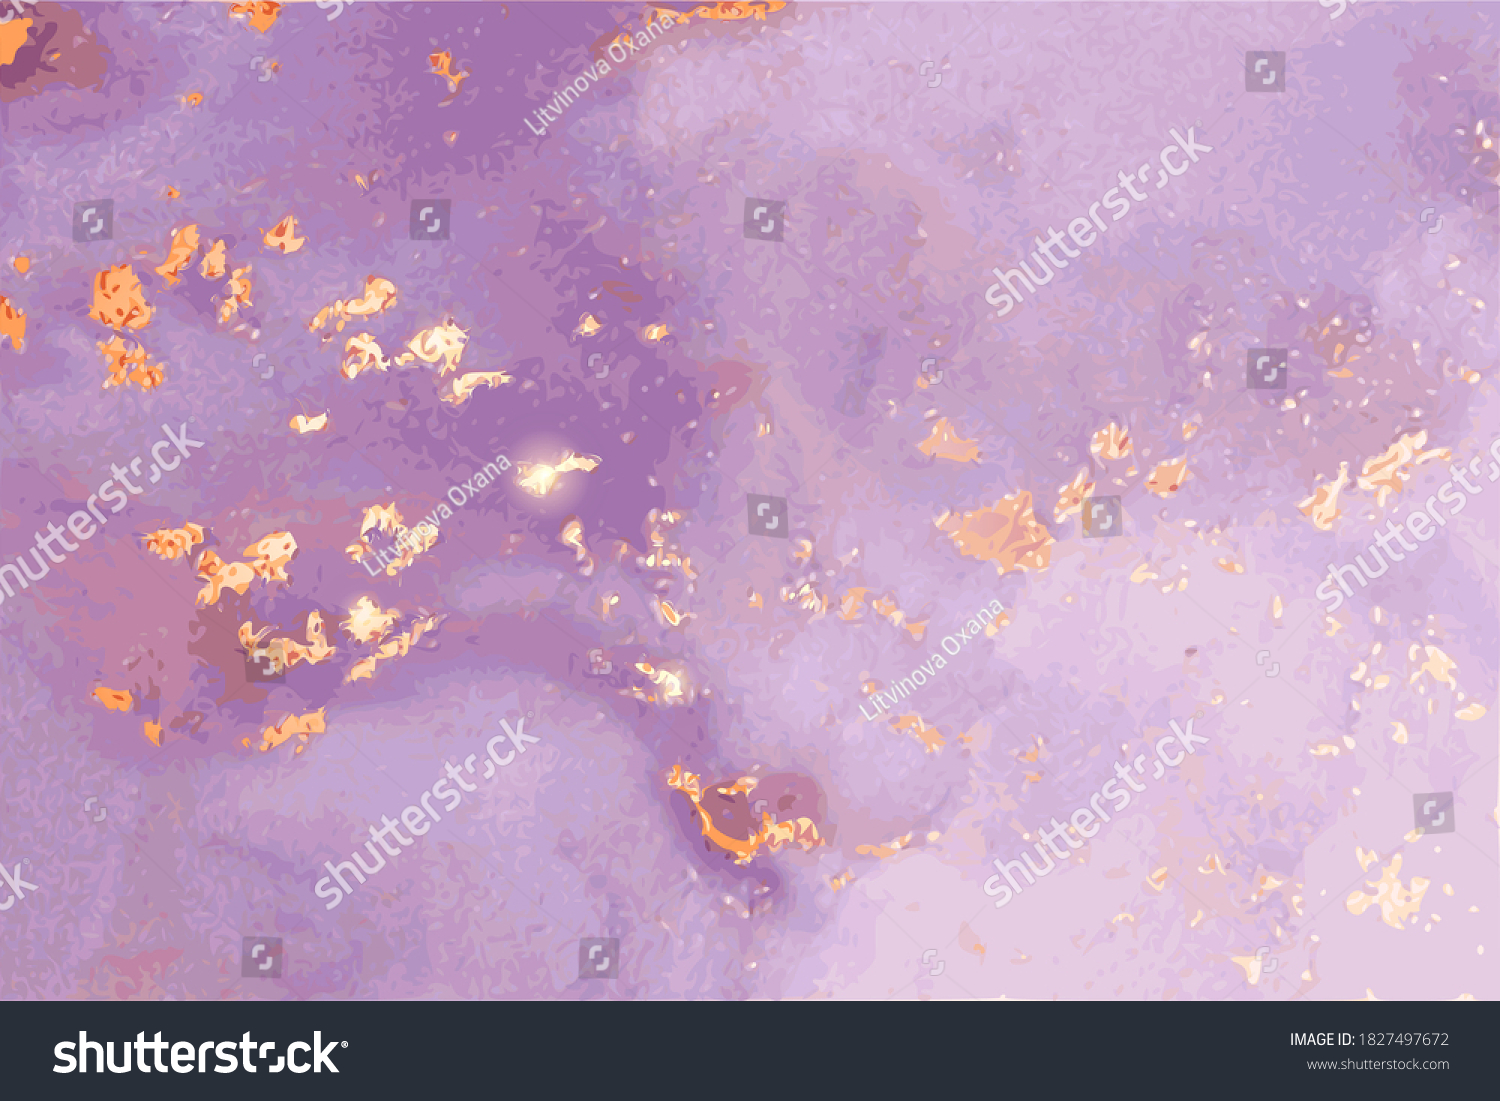 SVG of Luxury purple and gold stone marble texture. Alcohol ink technique abstract vector background. Modern paint with glitter. Template for banner, poster design. Fluid art painting svg